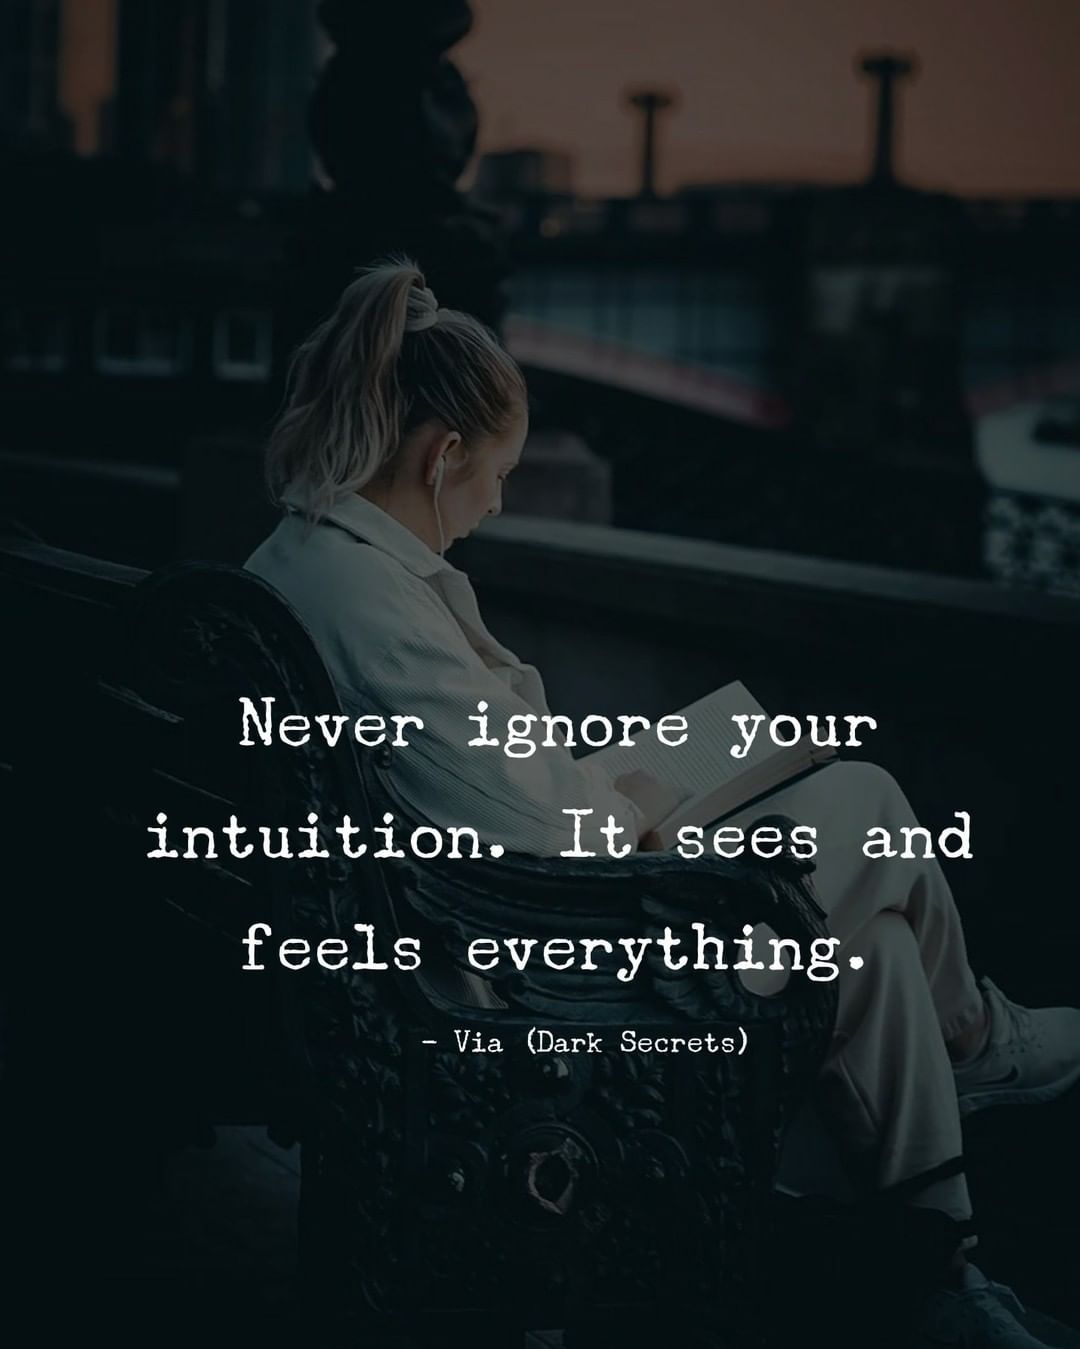 Never ignore your intuition. It sees and feels everything.